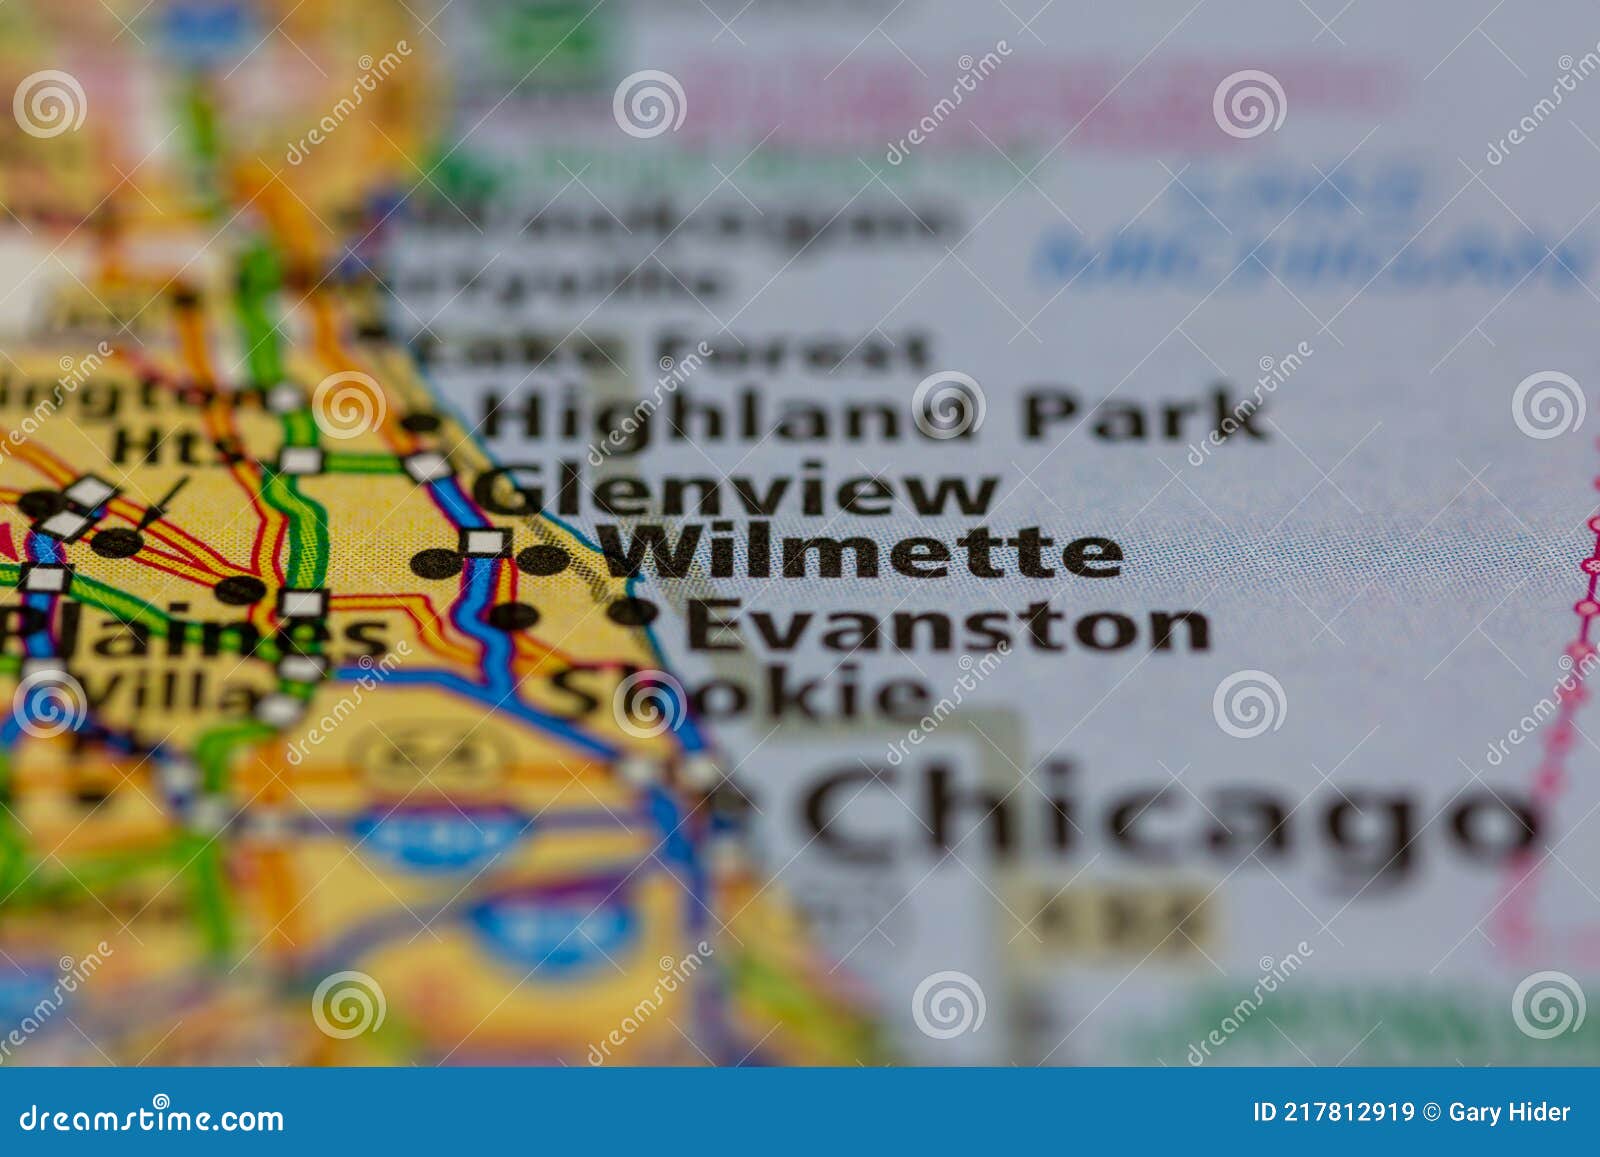 05-04-2021 portsmouth, hampshire, uk, wilmette illinois shown on a geography map or road map